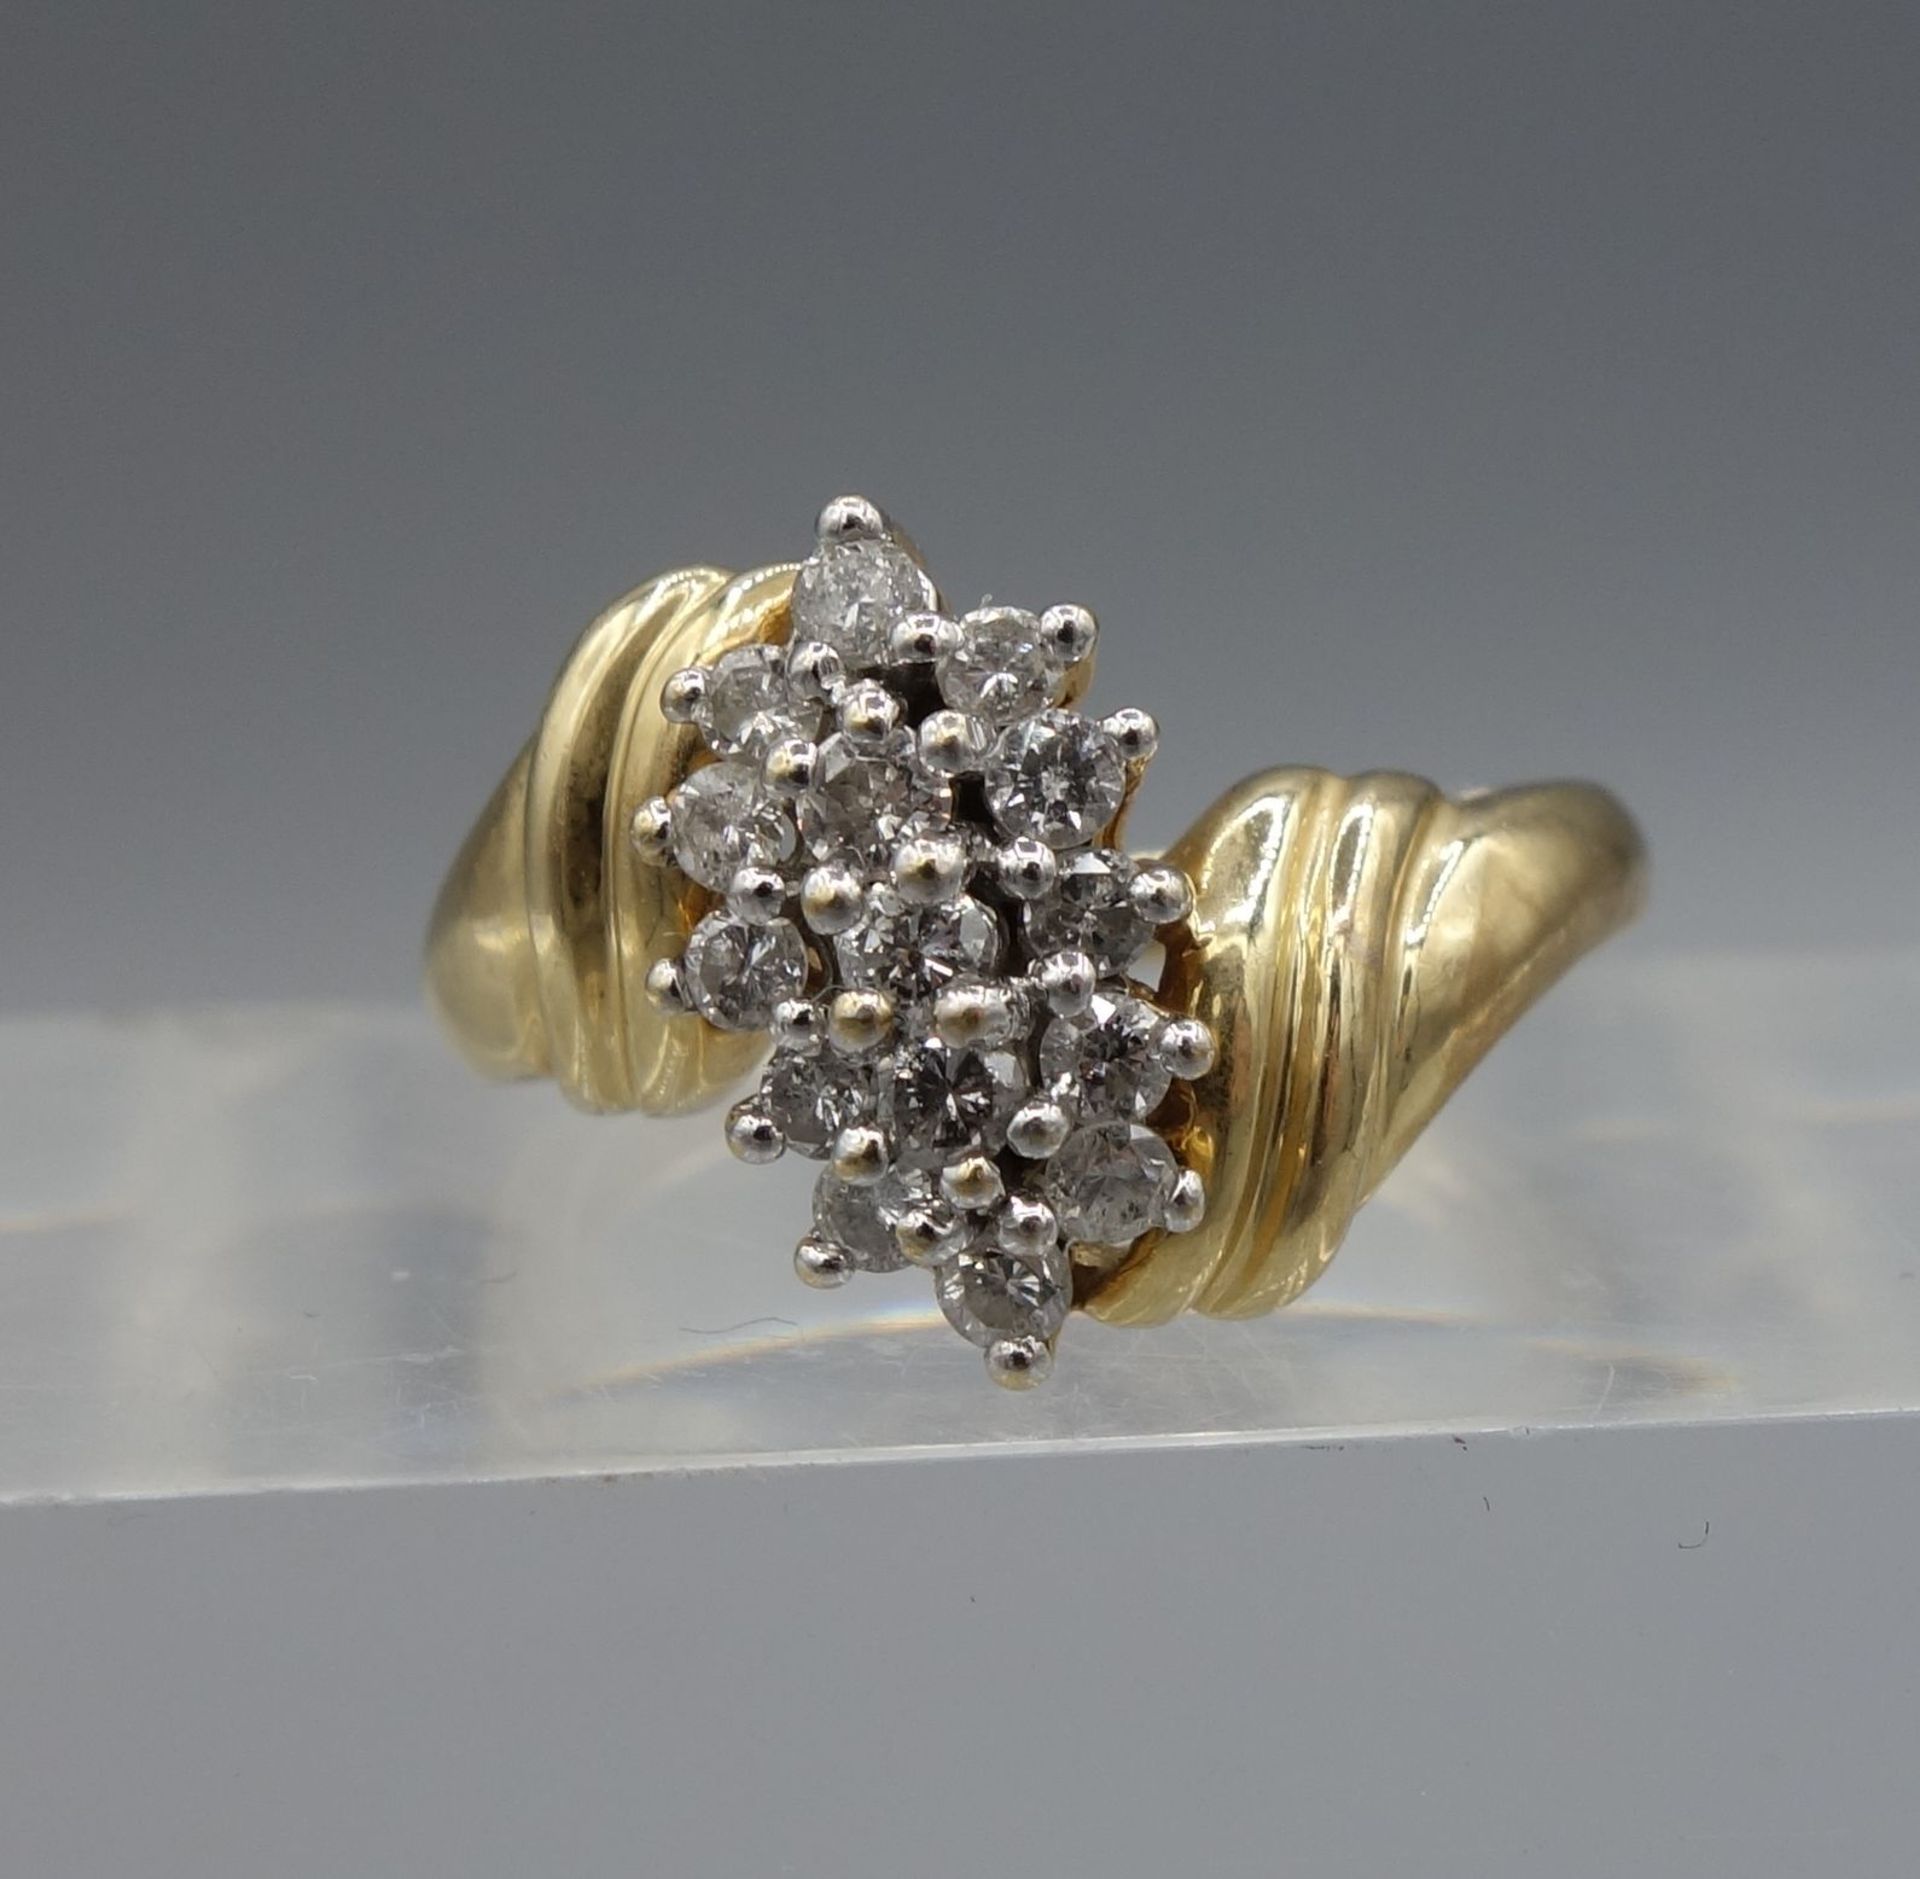 RING WITH DIAMONDS - Image 2 of 4